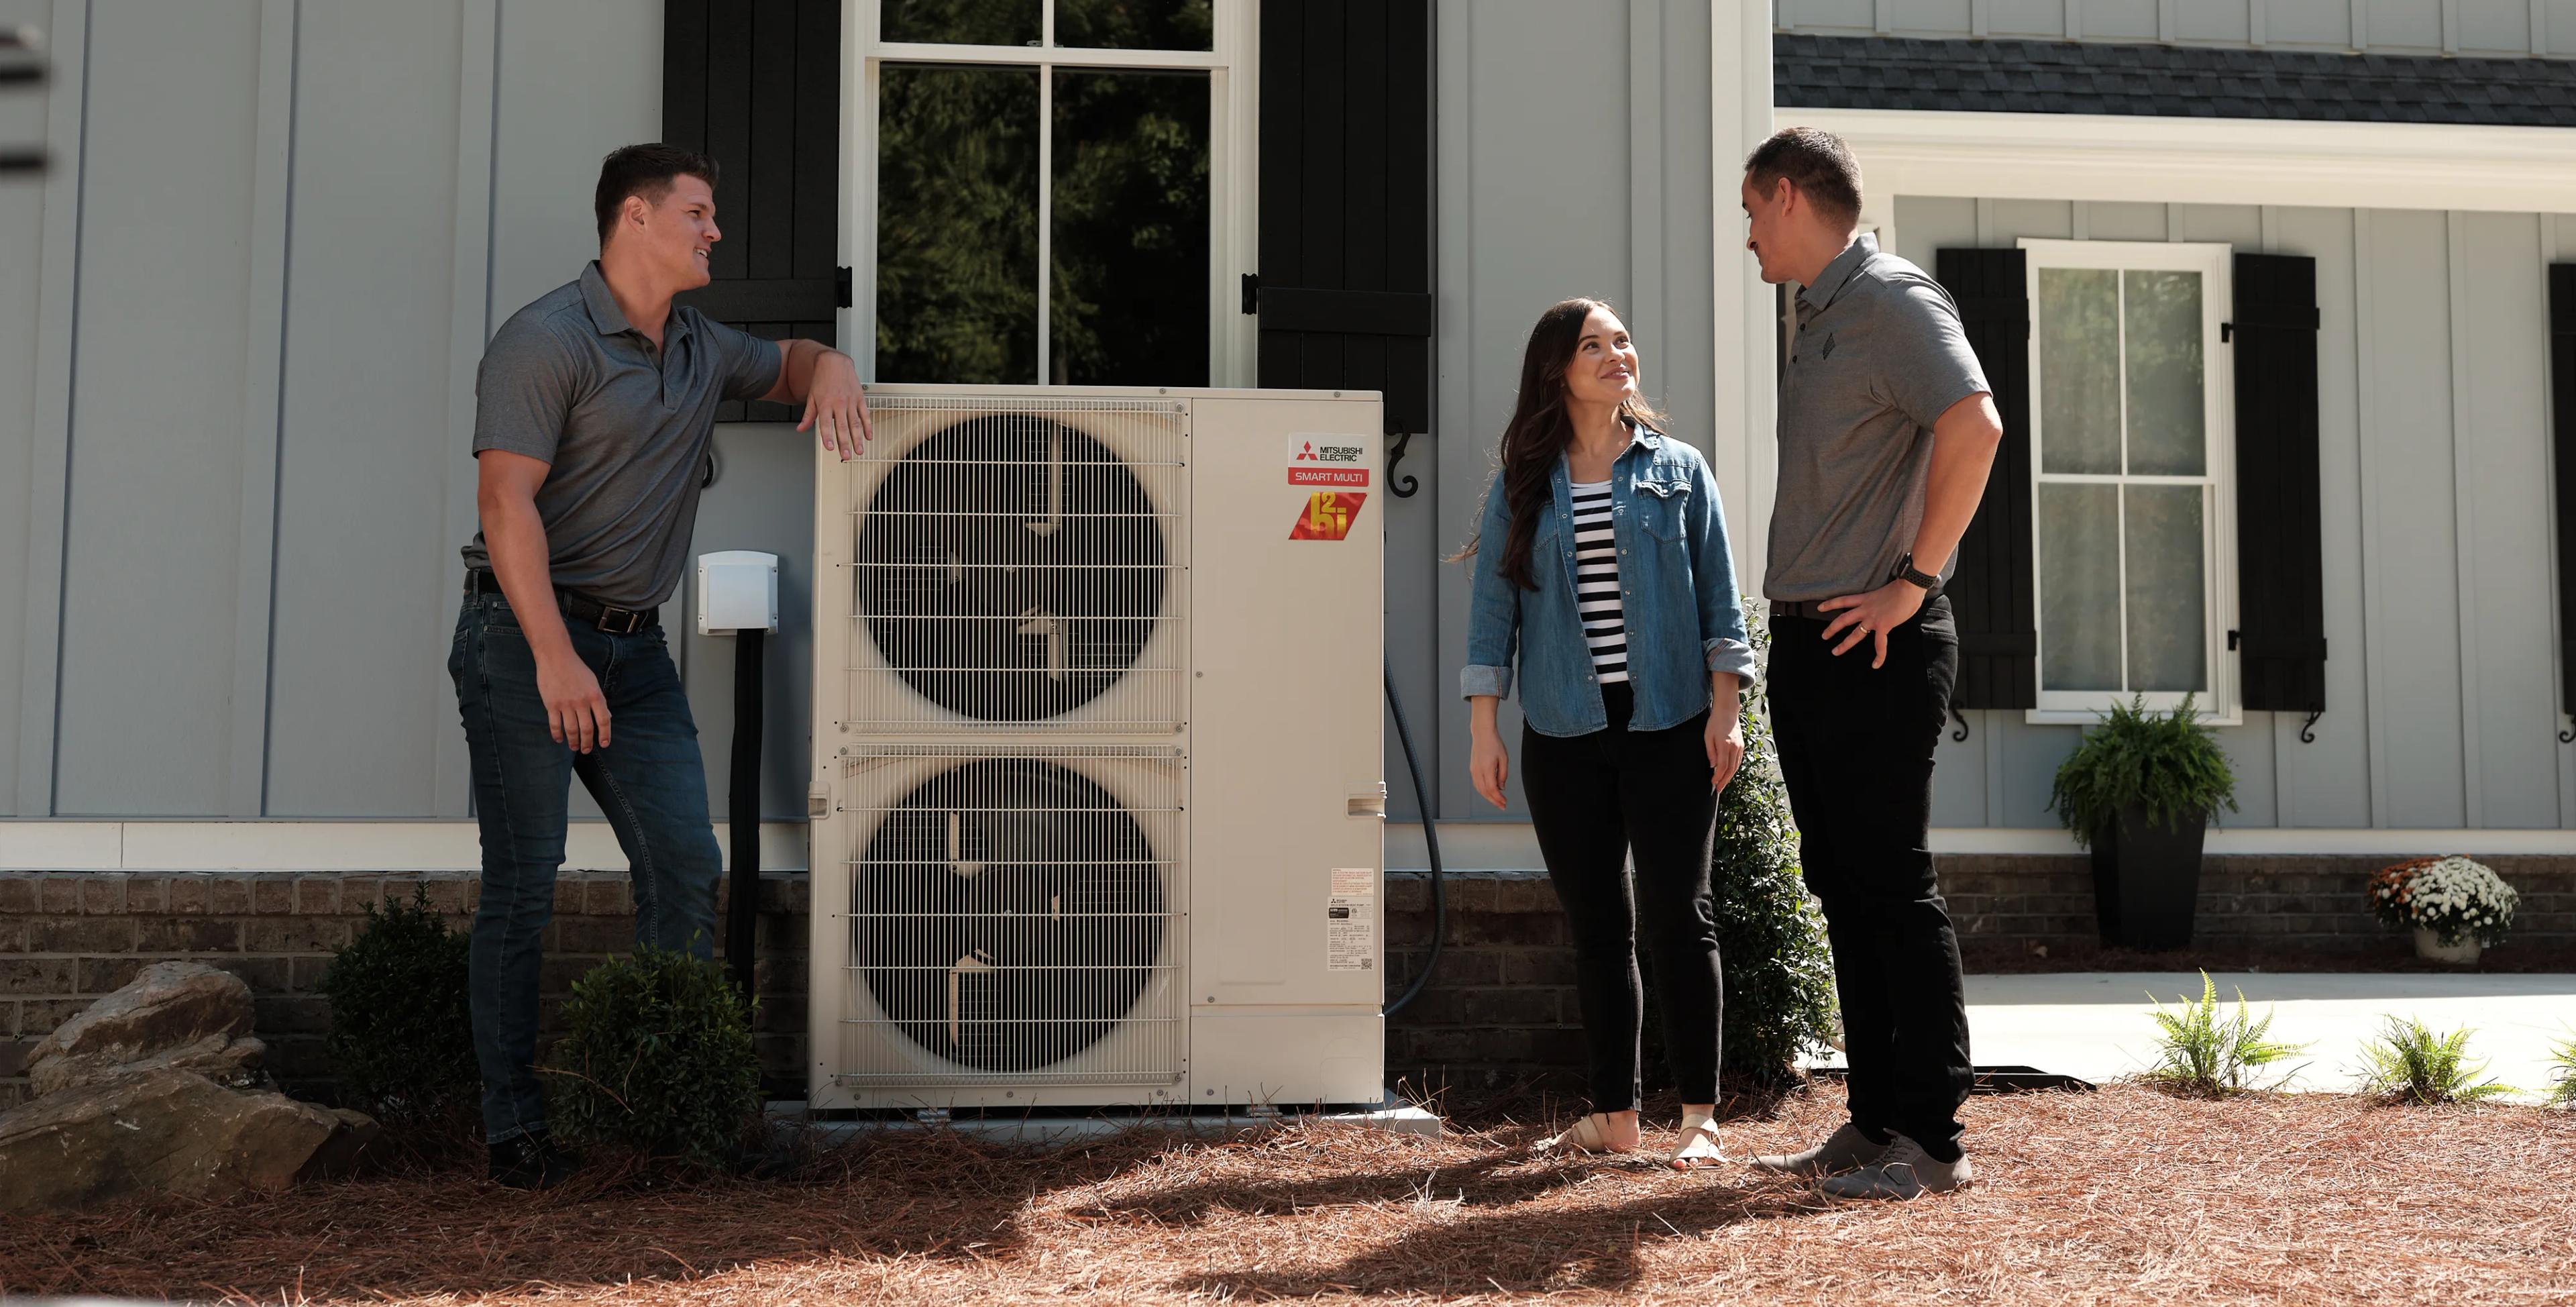 multi zone heat pump couple and contractor outdoor